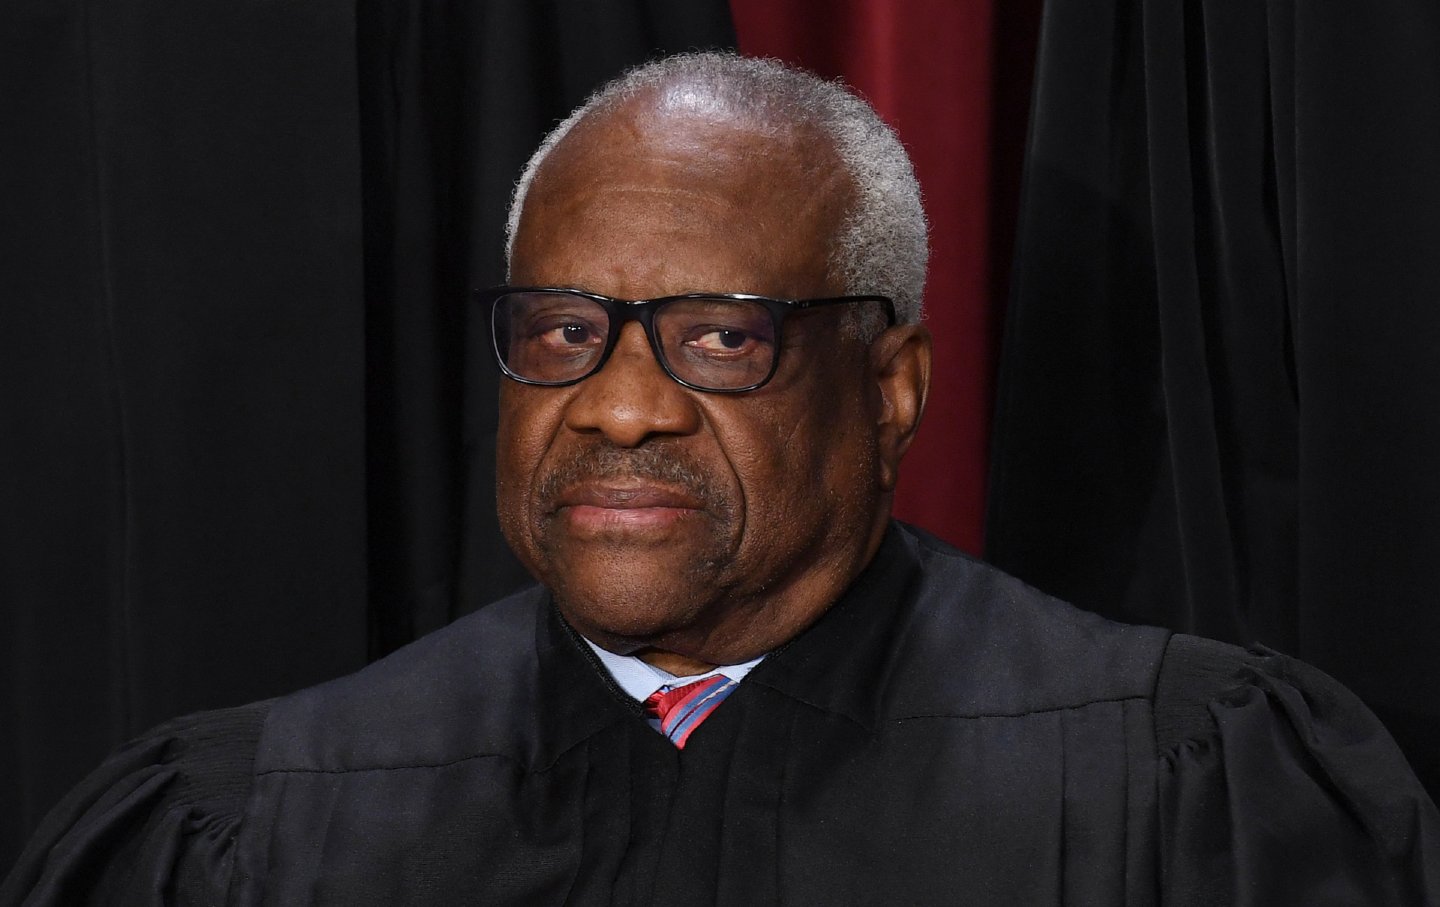 Clarence Thomas Broke the Law Why Is He Not Being Prosecuted? The Nation